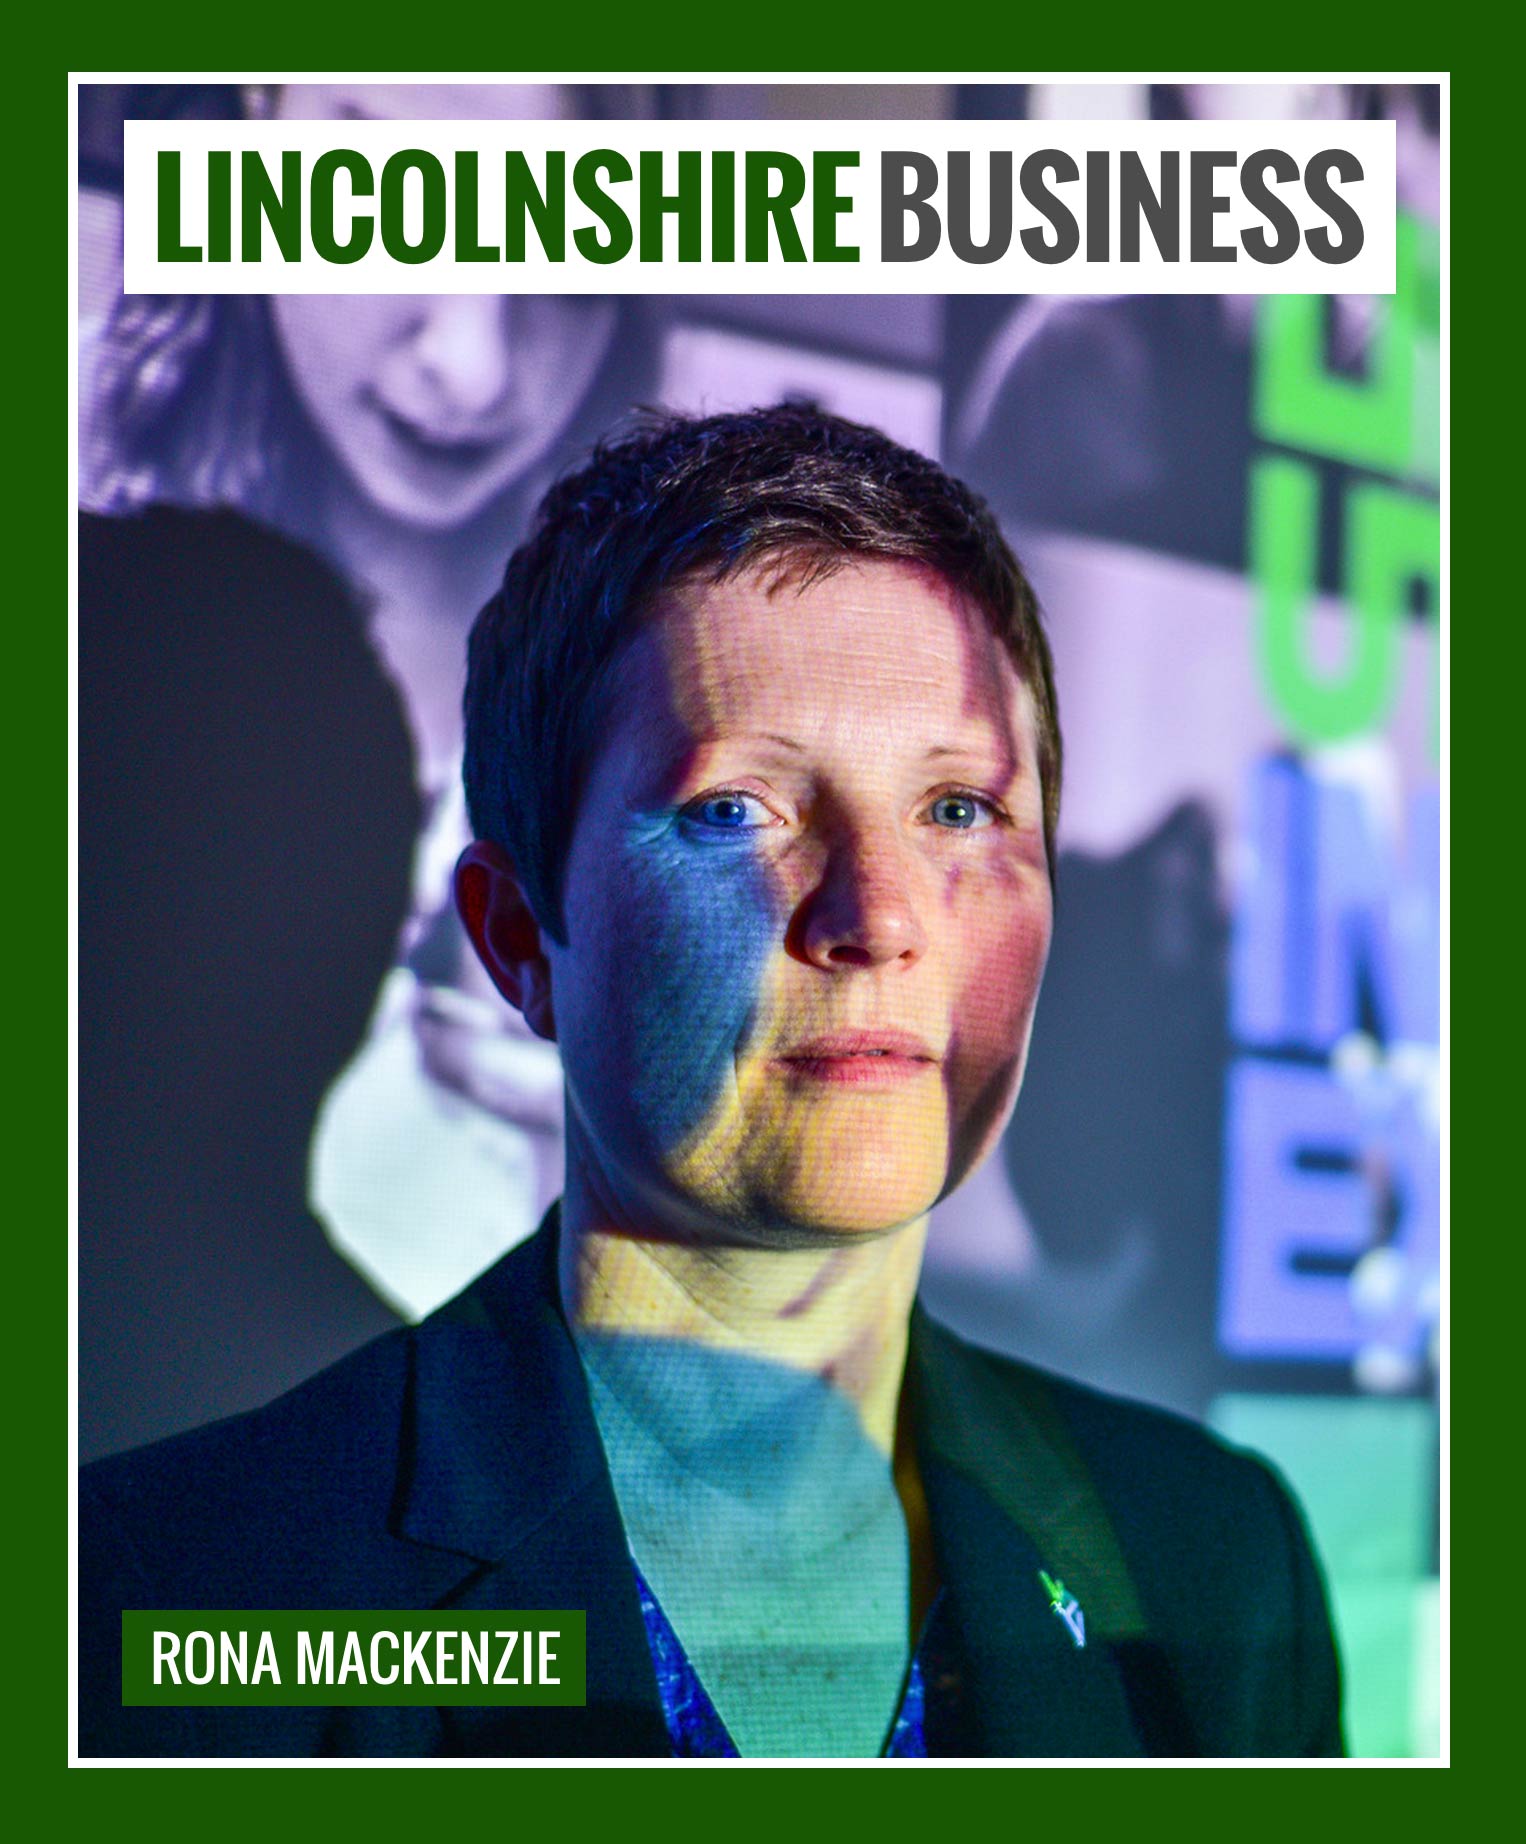 Rona Mackenzie on the cover of Lincolnshire Business magazine